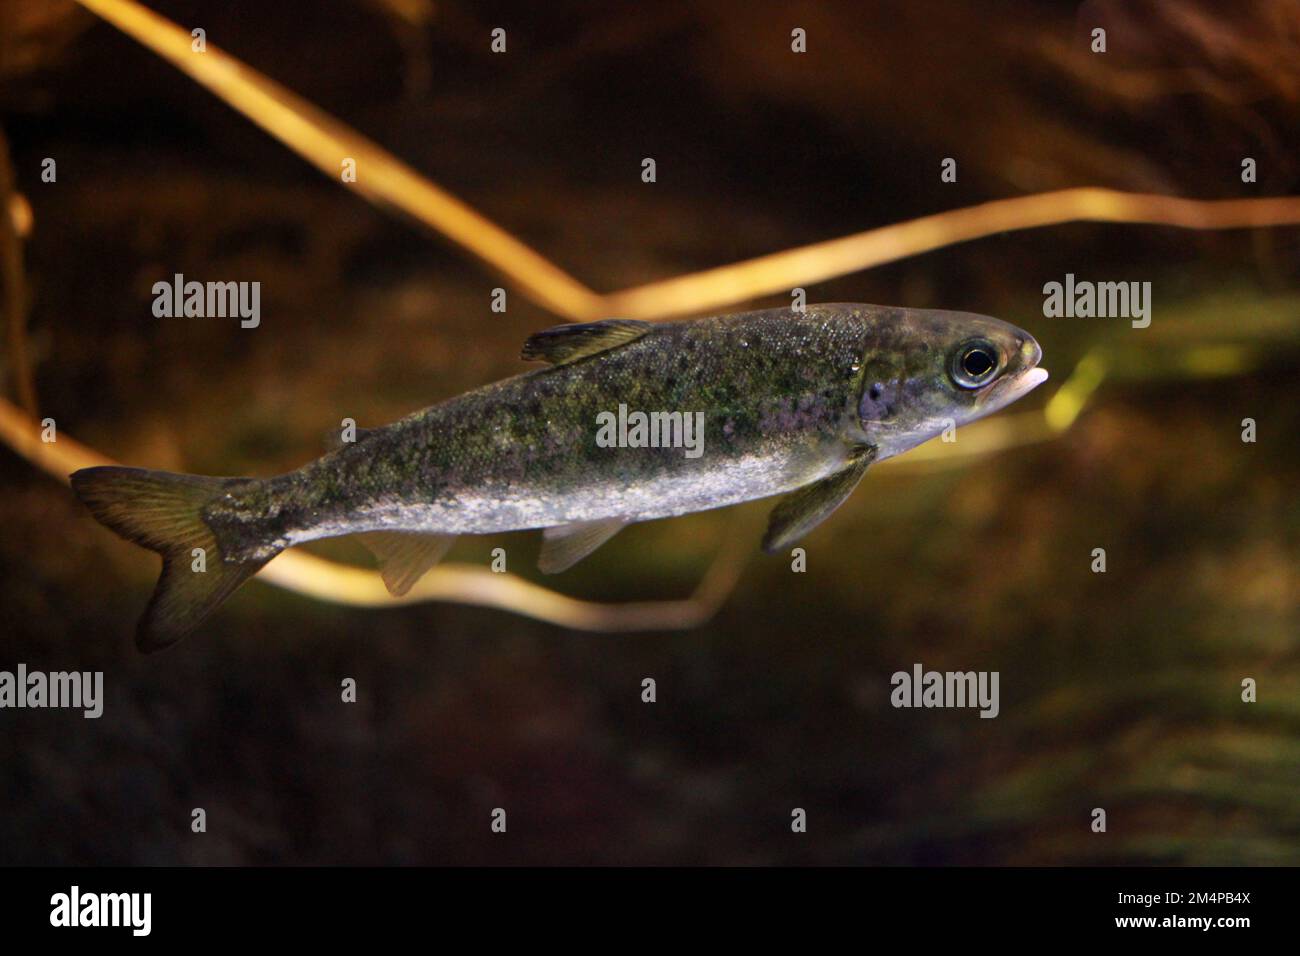 Juvenile of the Atlantic salmon (Salmo salar), a species of ray-finned fish, photographed in aquarium Stock Photo